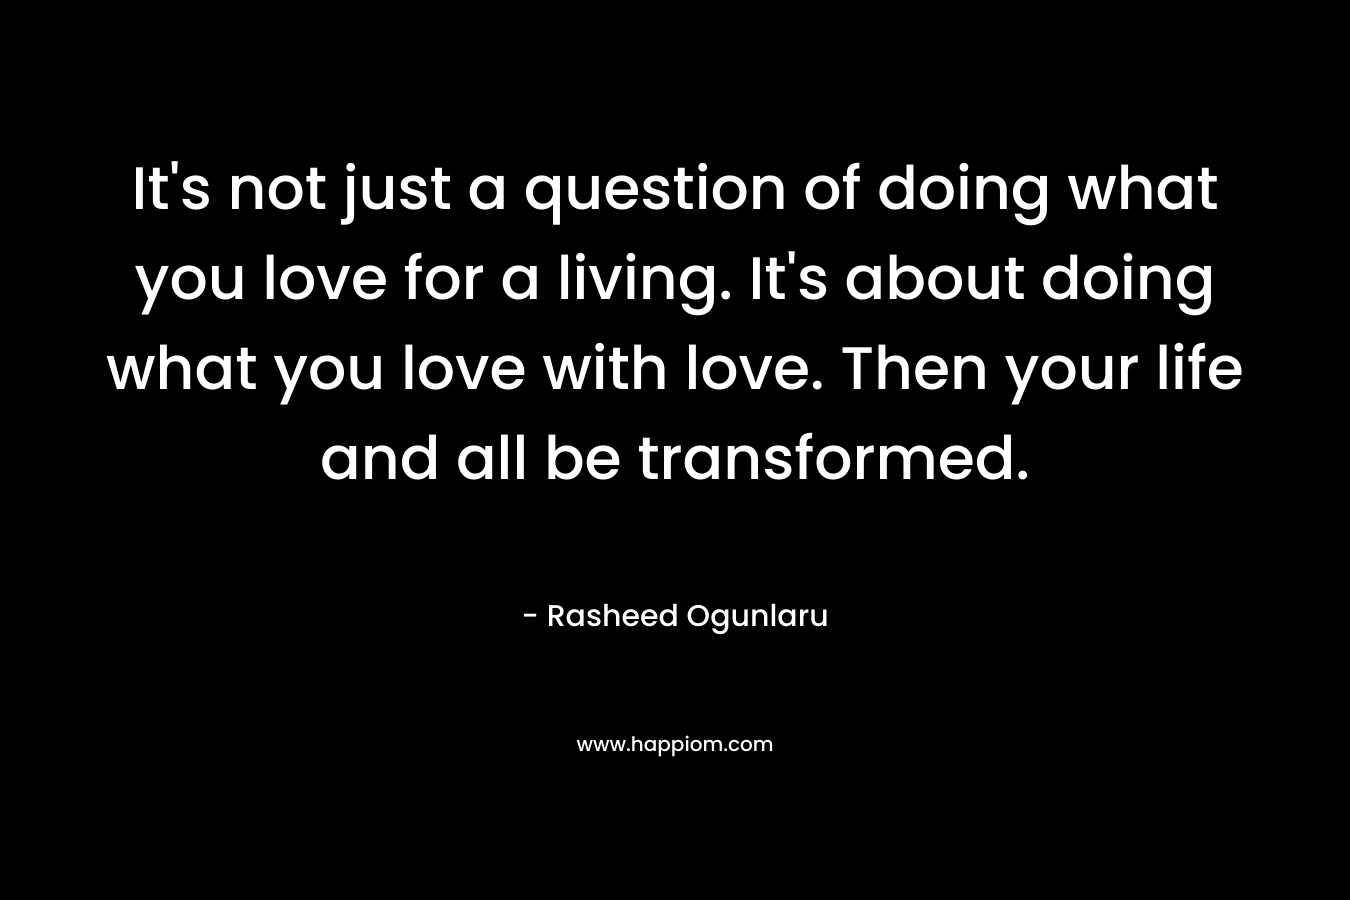 It’s not just a question of doing what you love for a living. It’s about doing what you love with love. Then your life and all be transformed. – Rasheed Ogunlaru